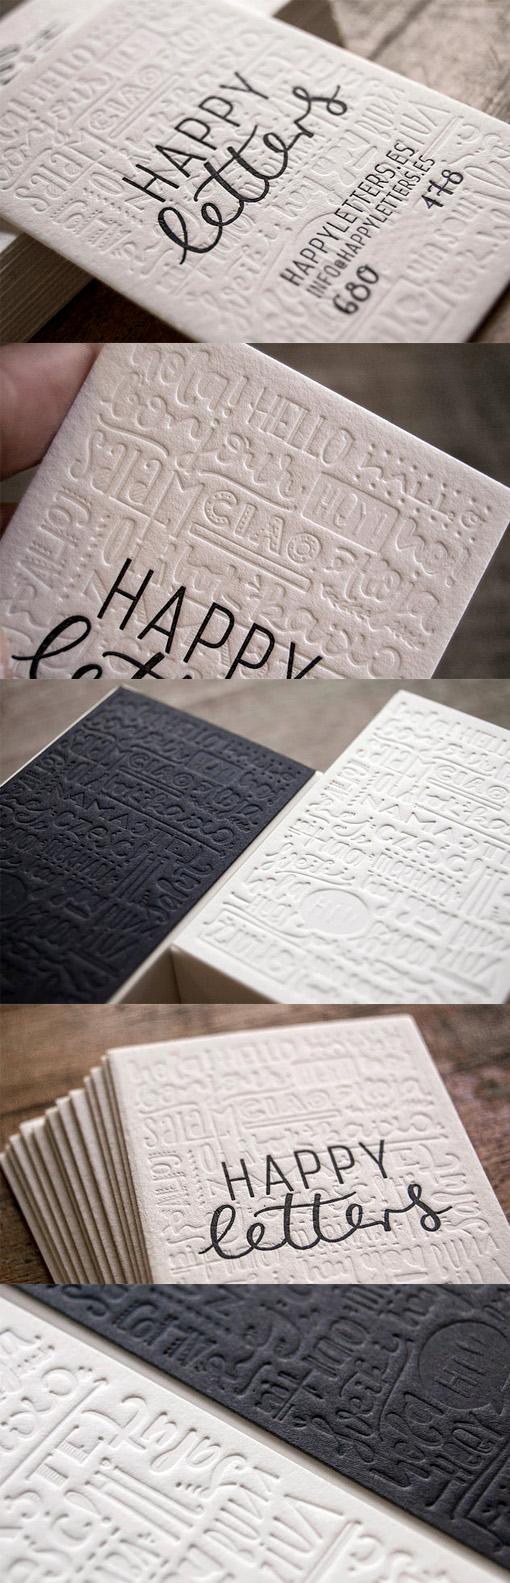 Blind Pressed Textured Black And White Business Card For A Typographer